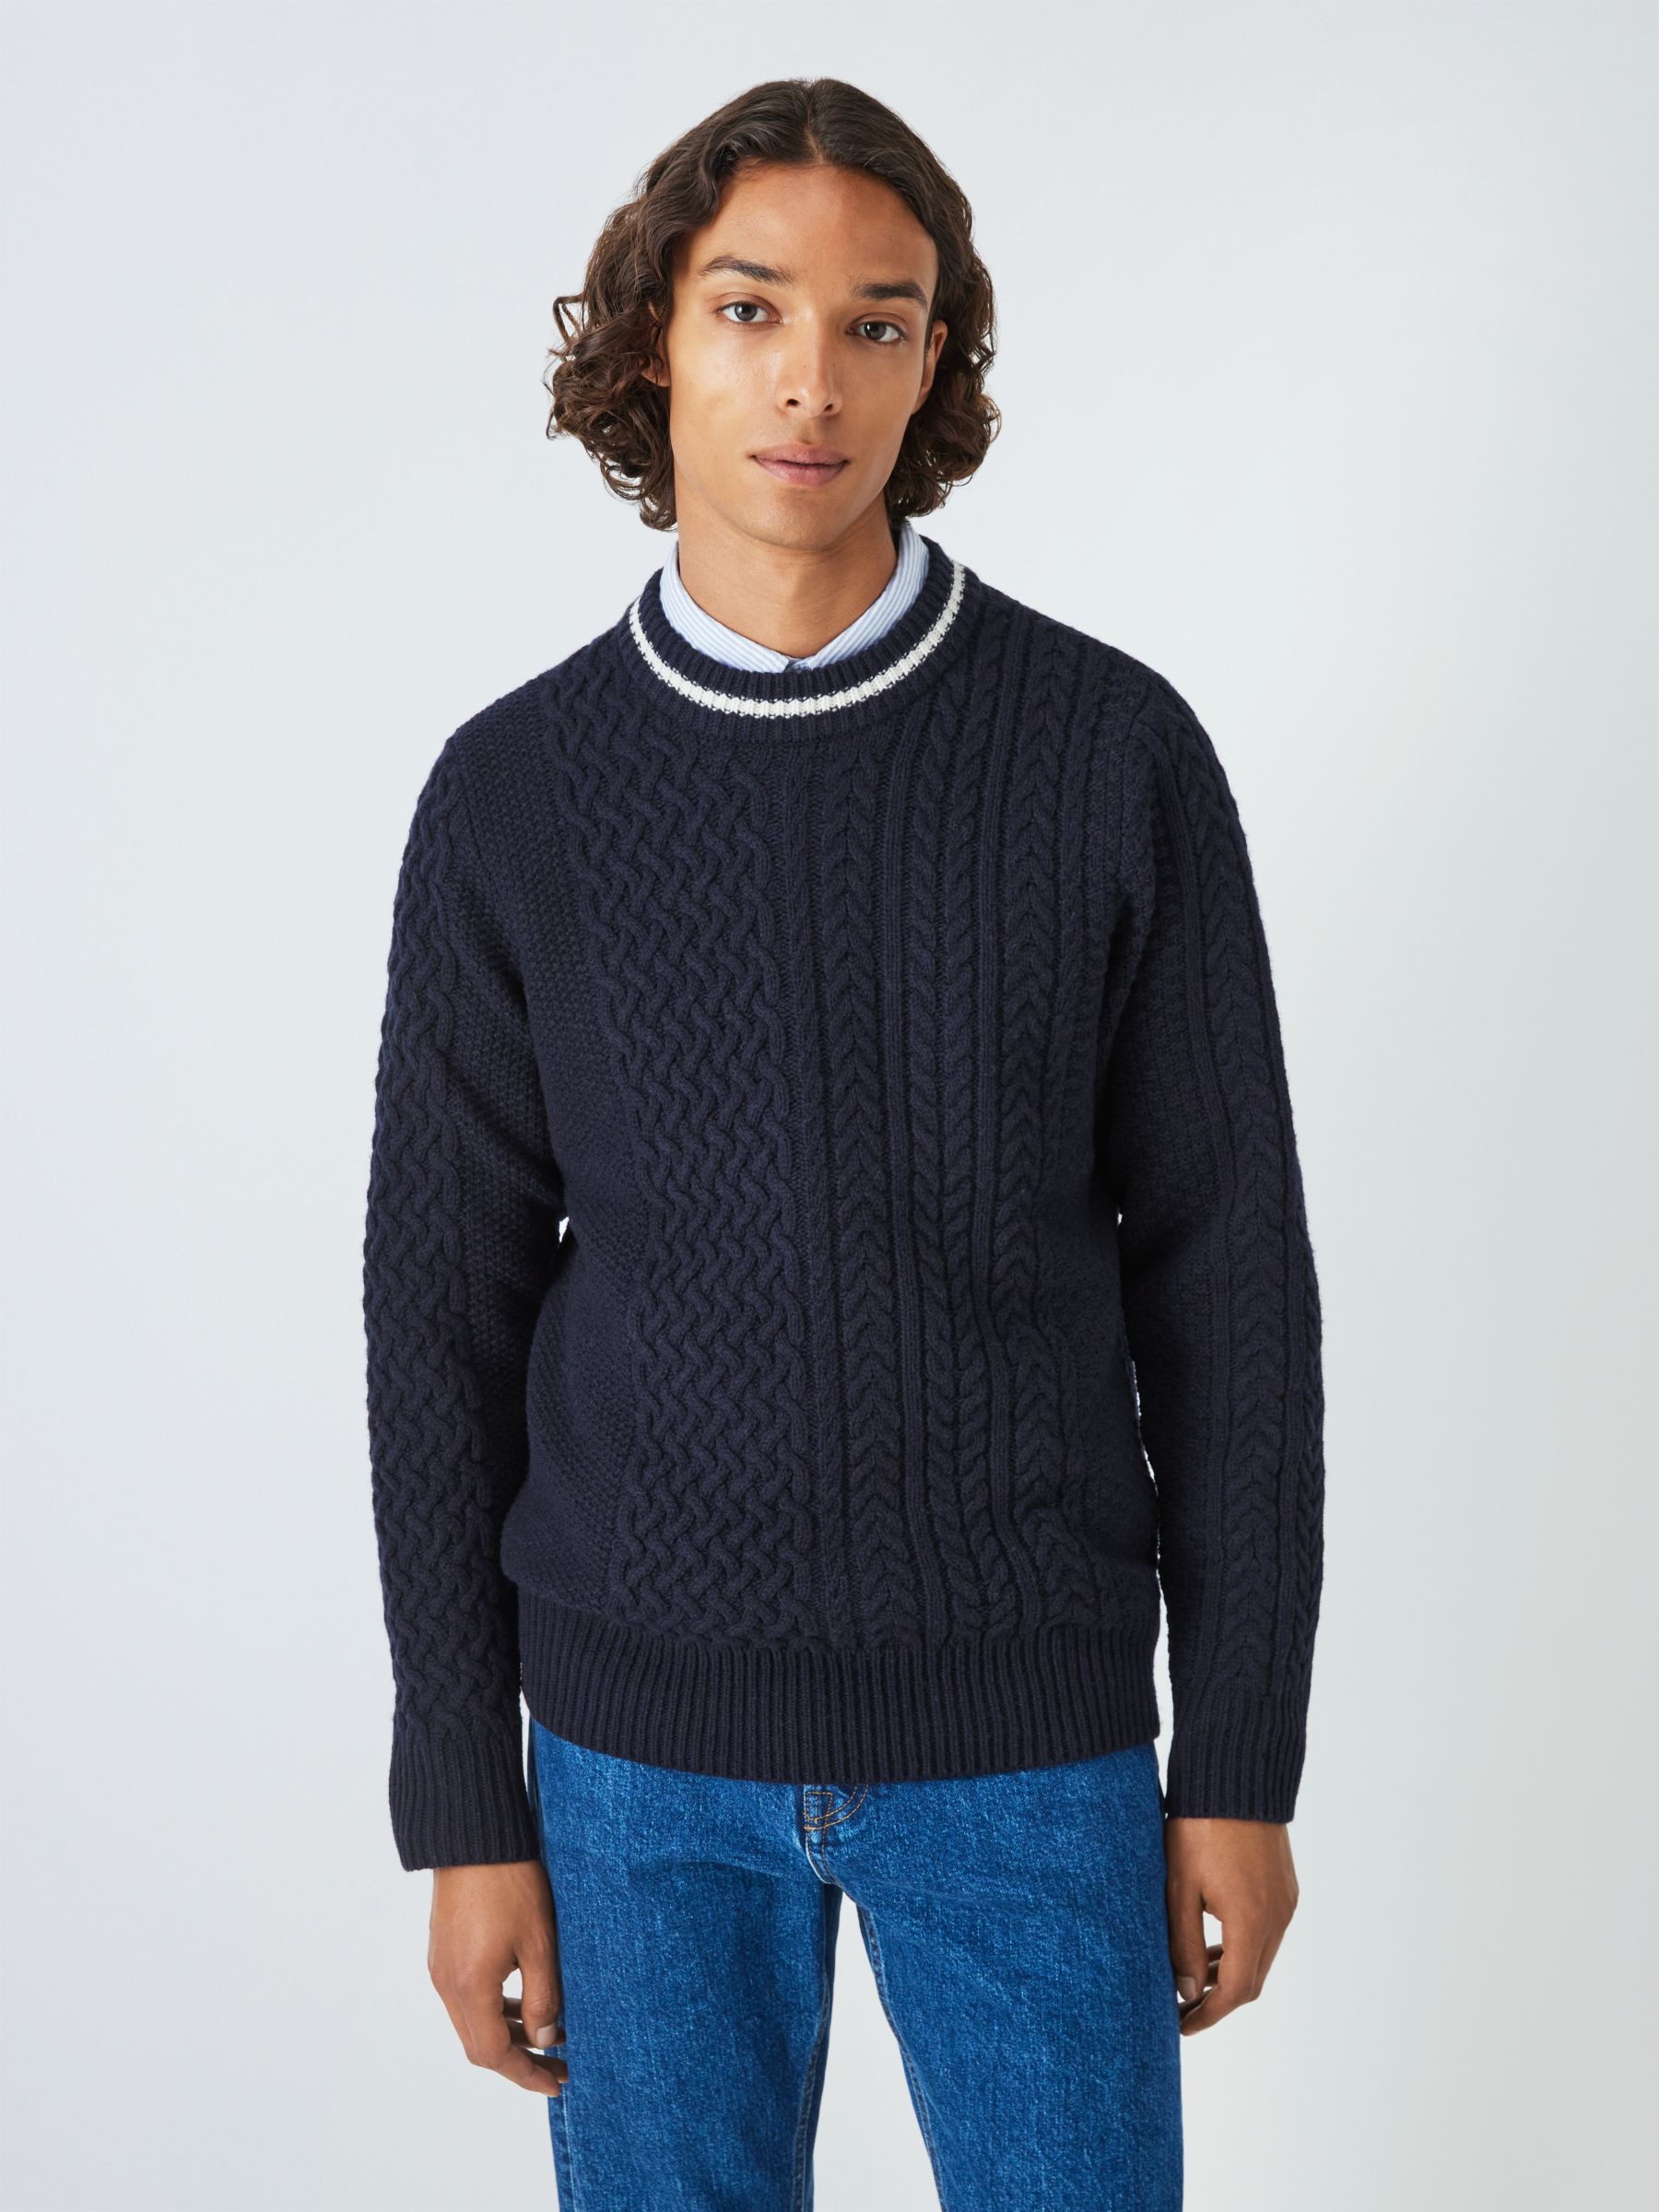 John Lewis Lambswool Cable Knit Jumper, Navy at John Lewis & Partners